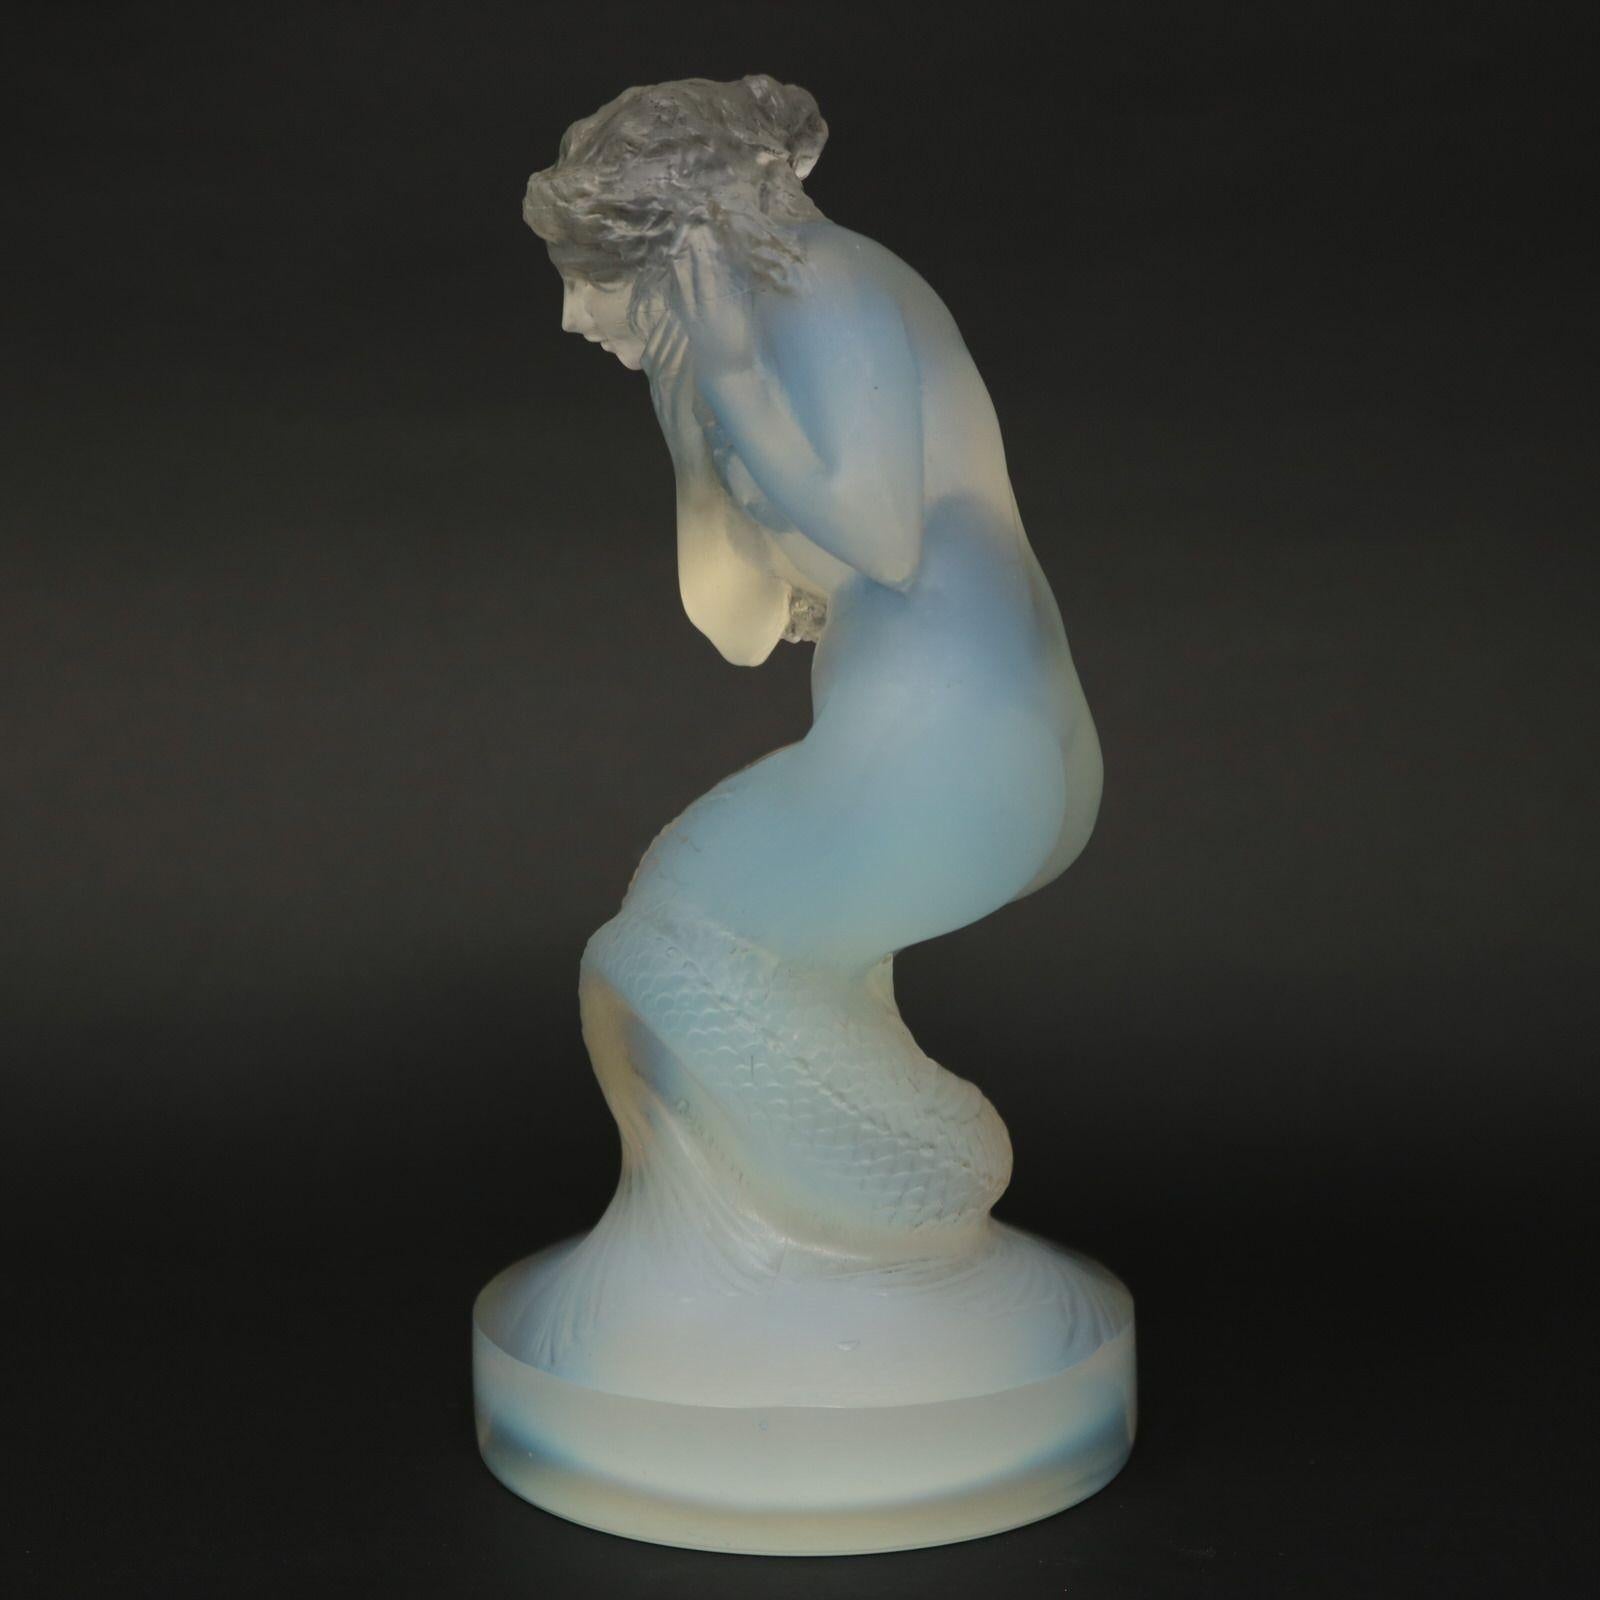 Rene lalique opalescent glass 'naiade' statuette. Grey stained details. Features a naiad crouching, holding a shell(?) up to her ear. In Greek mythology, the naiads are a type of female spirit or nymph, with fish tails. They preside over wells,